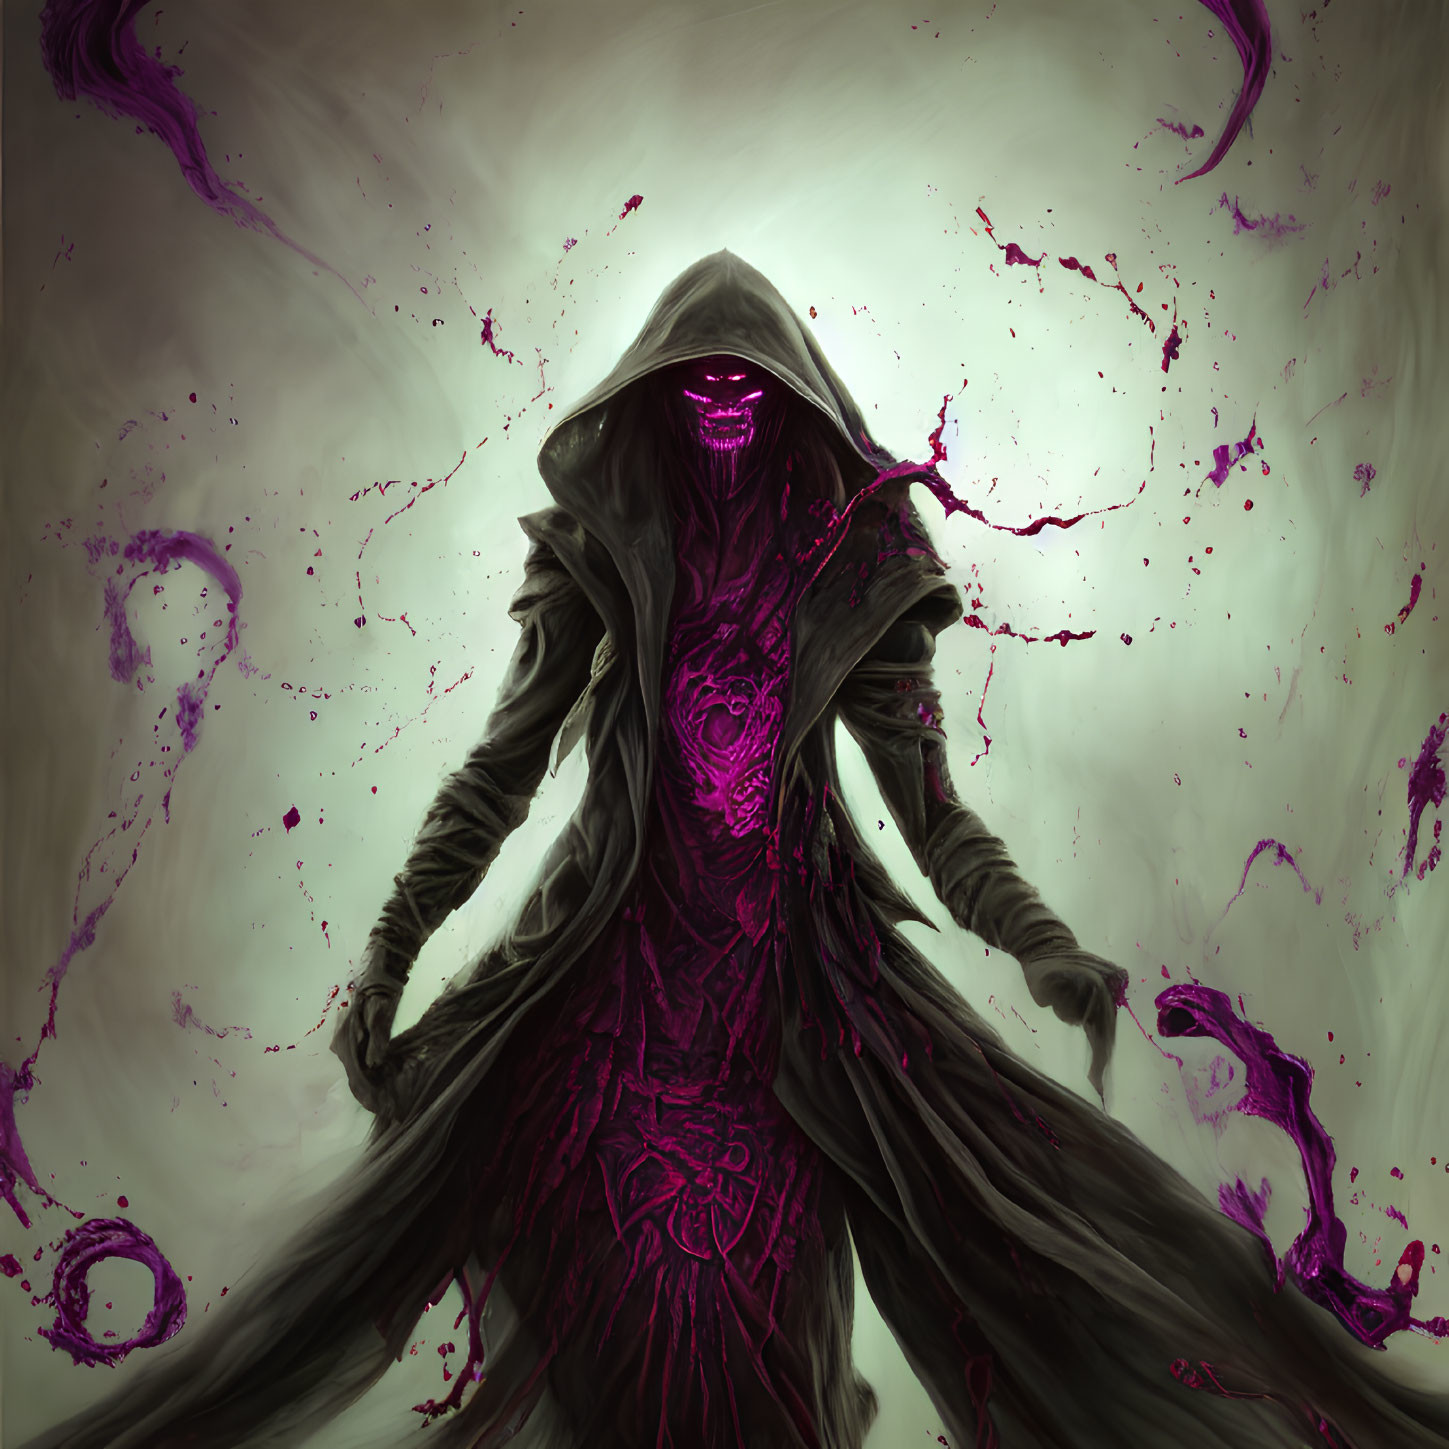 Hooded Figure in Purple Robes with Glowing Eyes and Dark Energy